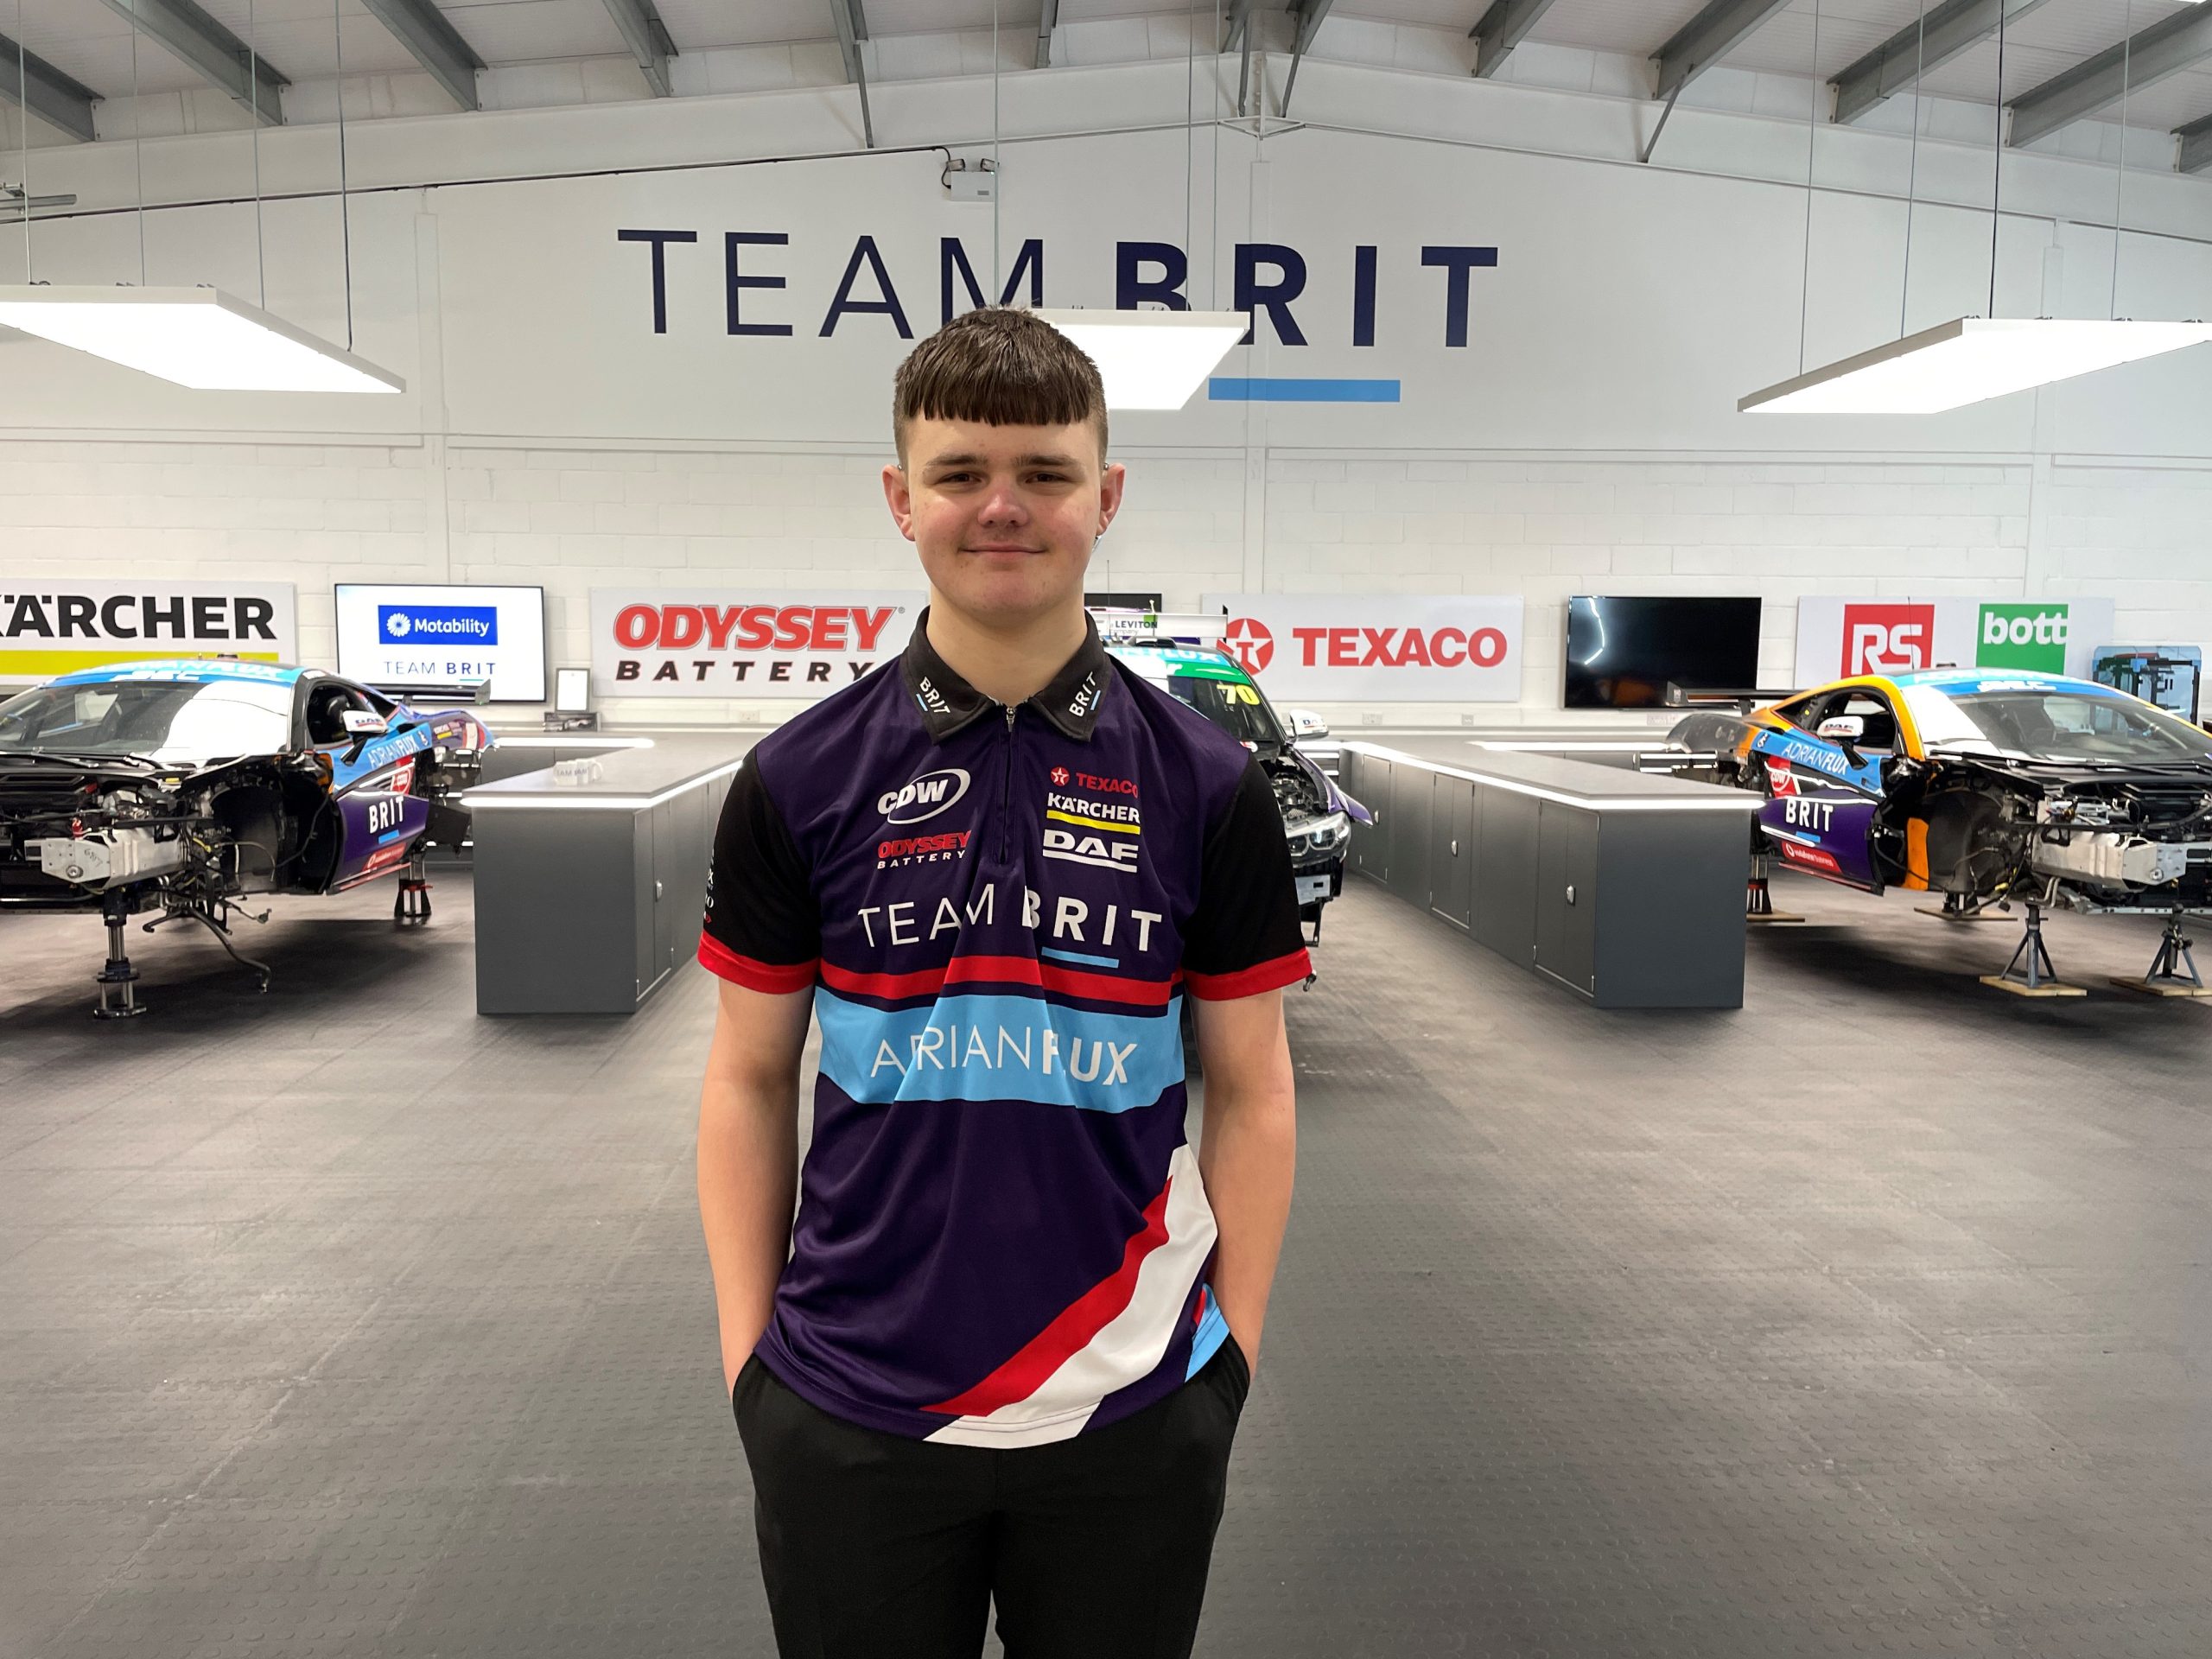 UK’s only male Deaf racing driver joins Team BRIT